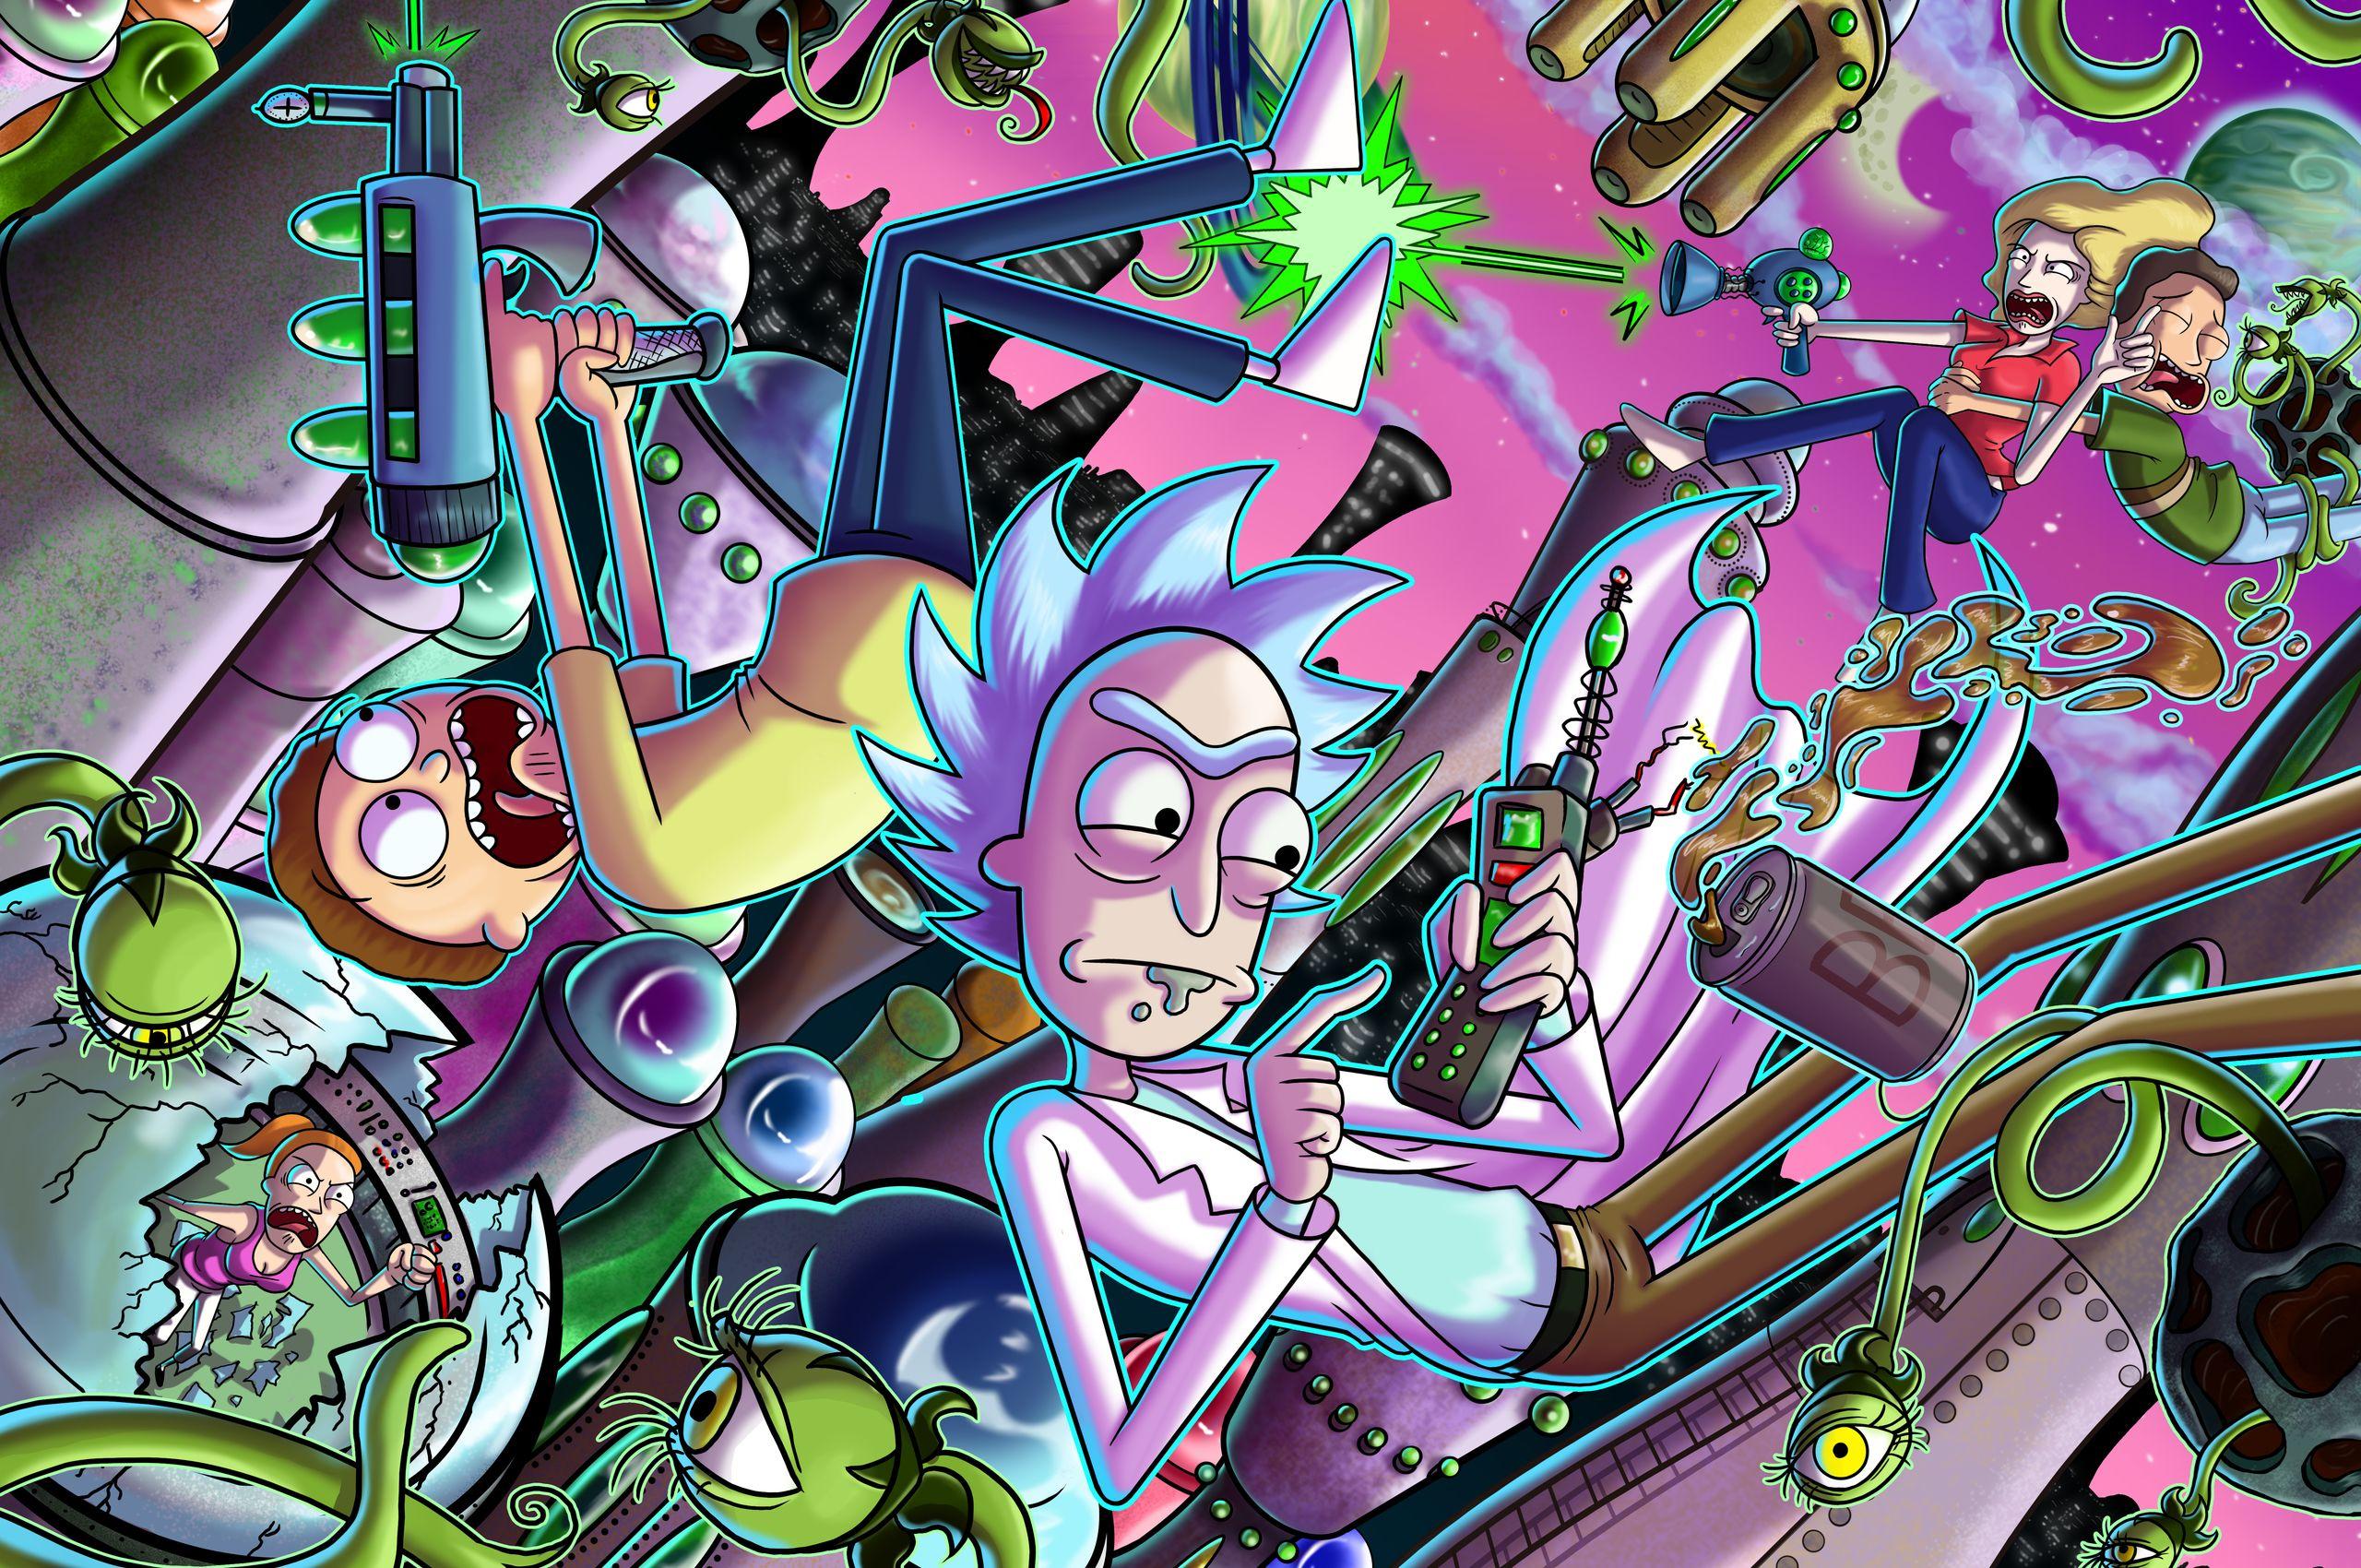 Rick and Morty Trippy Wallpaper Free Rick and Morty Trippy